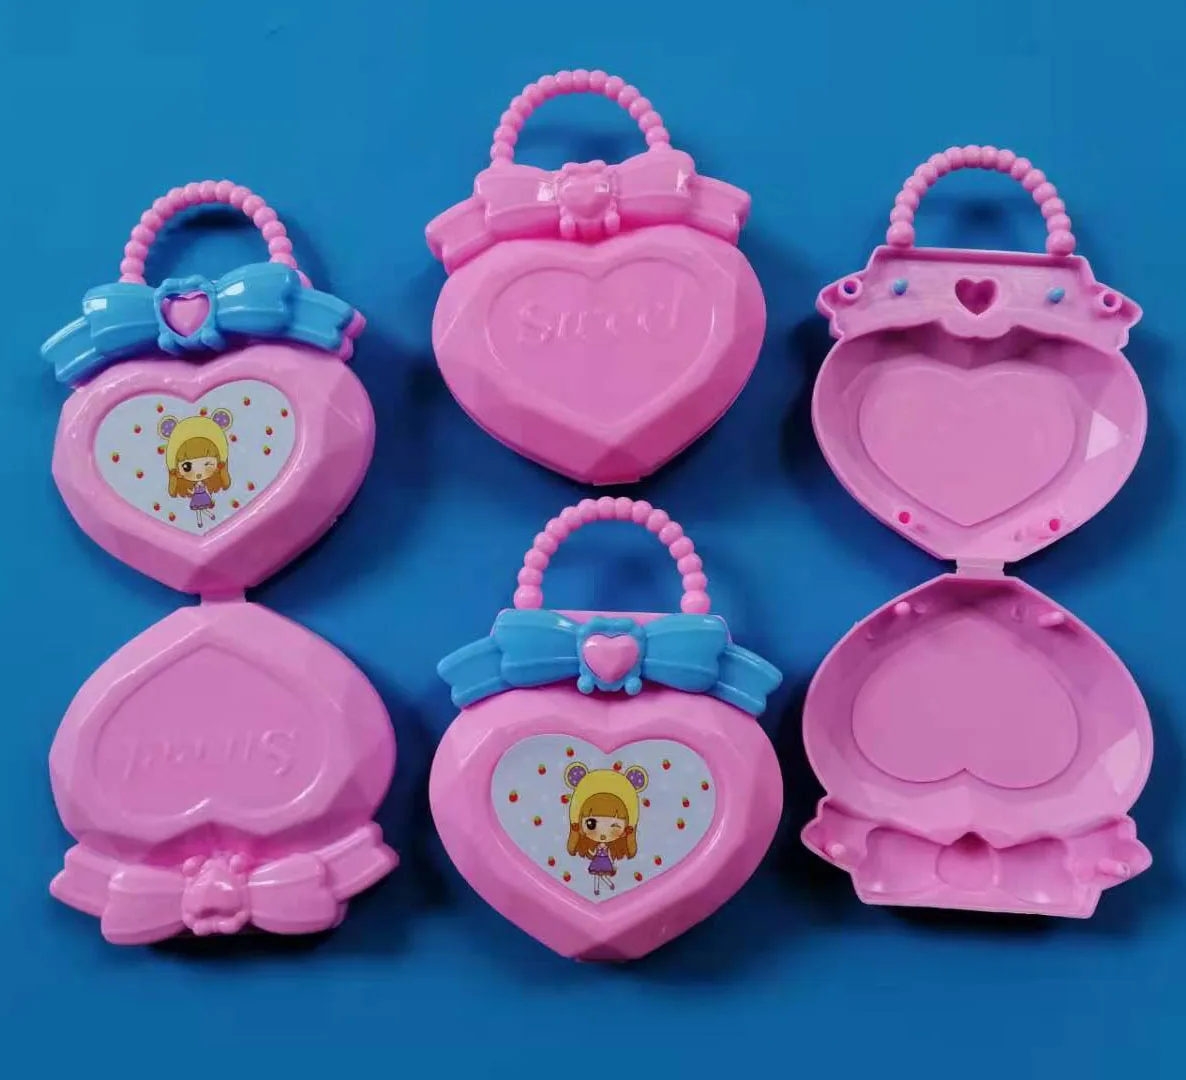 Beilinda Toys Plastic Toys  Fashion Bag Butterfly Heart Bag Heart Sticker Sweet Handbag In Mix Colour 4pcs In One Lot